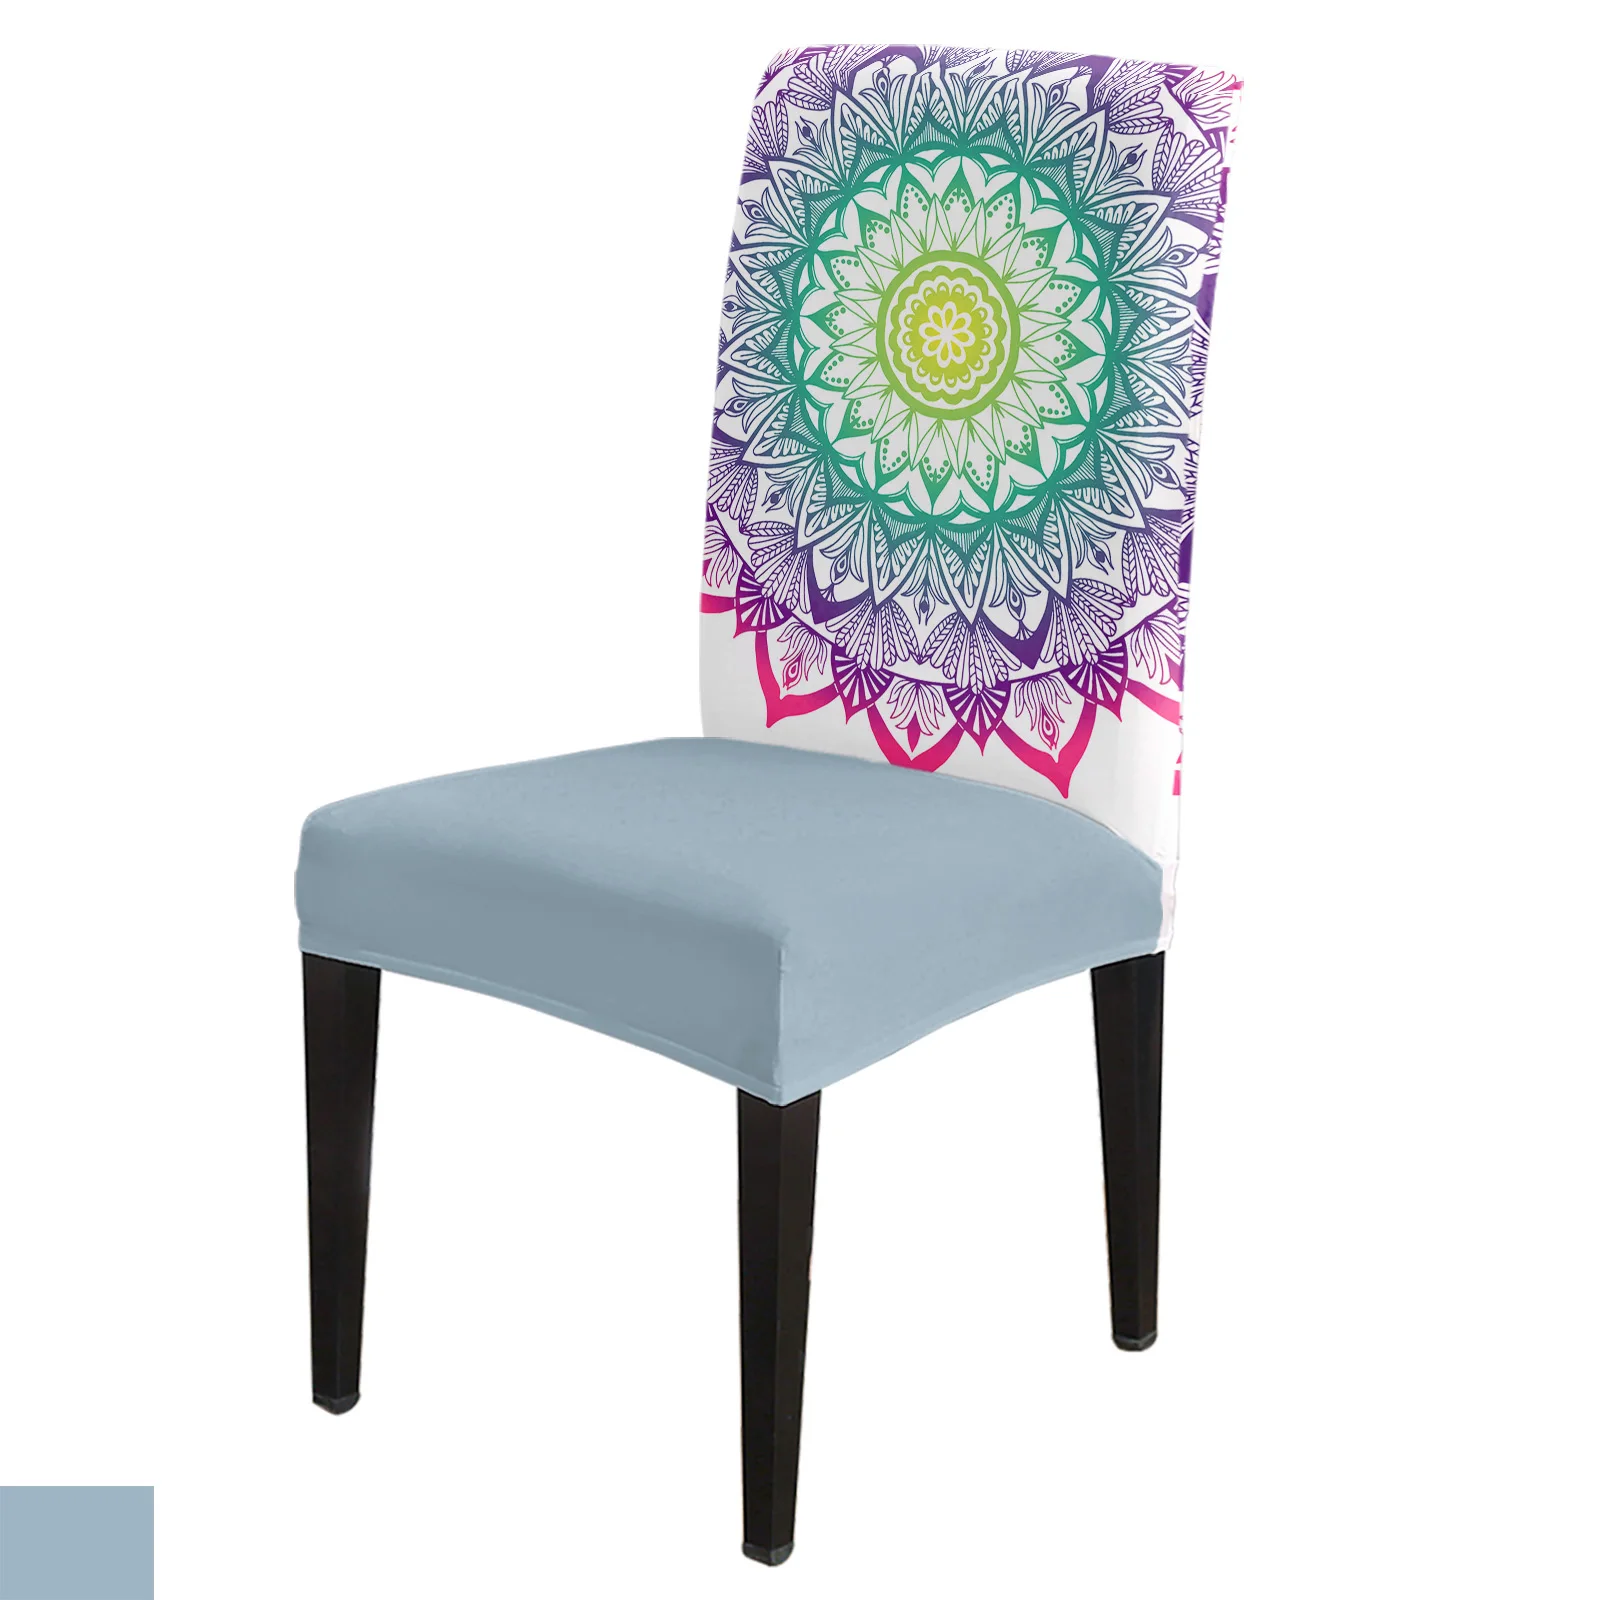 

White Mandala Flower Boho Dining Chair Cover 4/6/8PCS Spandex Elastic Chair Slipcover Case for Wedding Hotel Banquet Dining Room